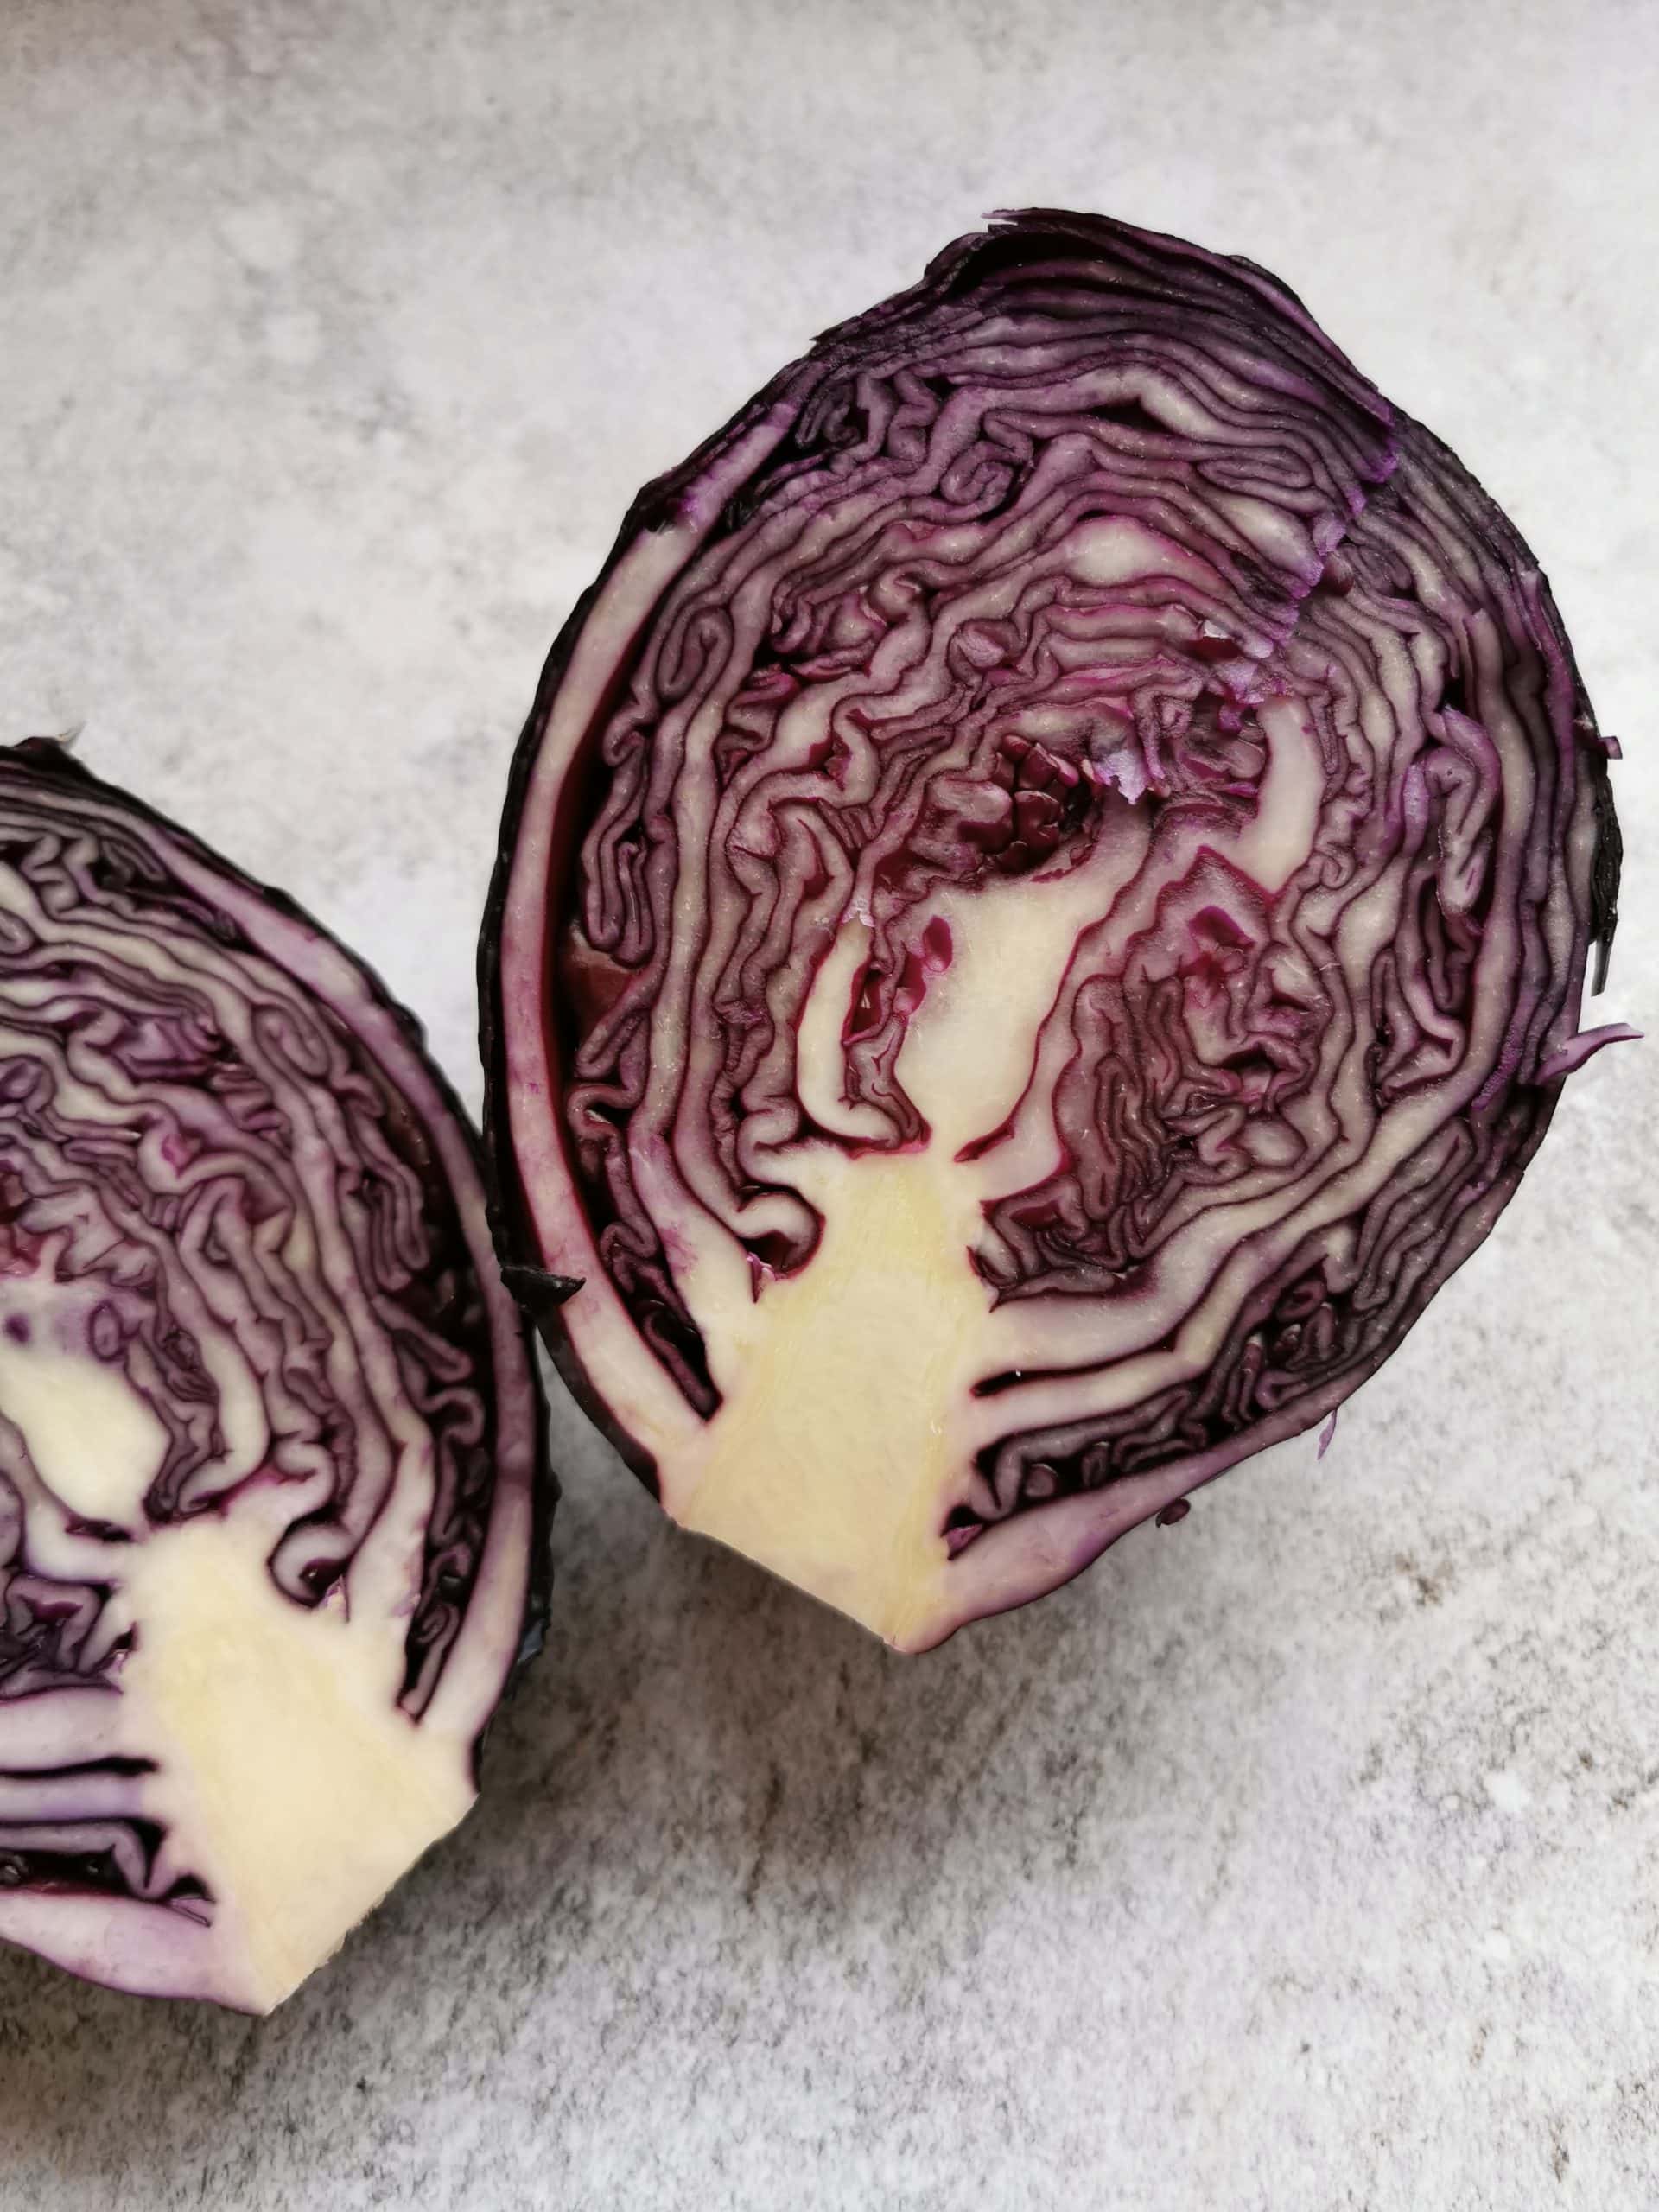 A red cabbage cut in half on a grey background